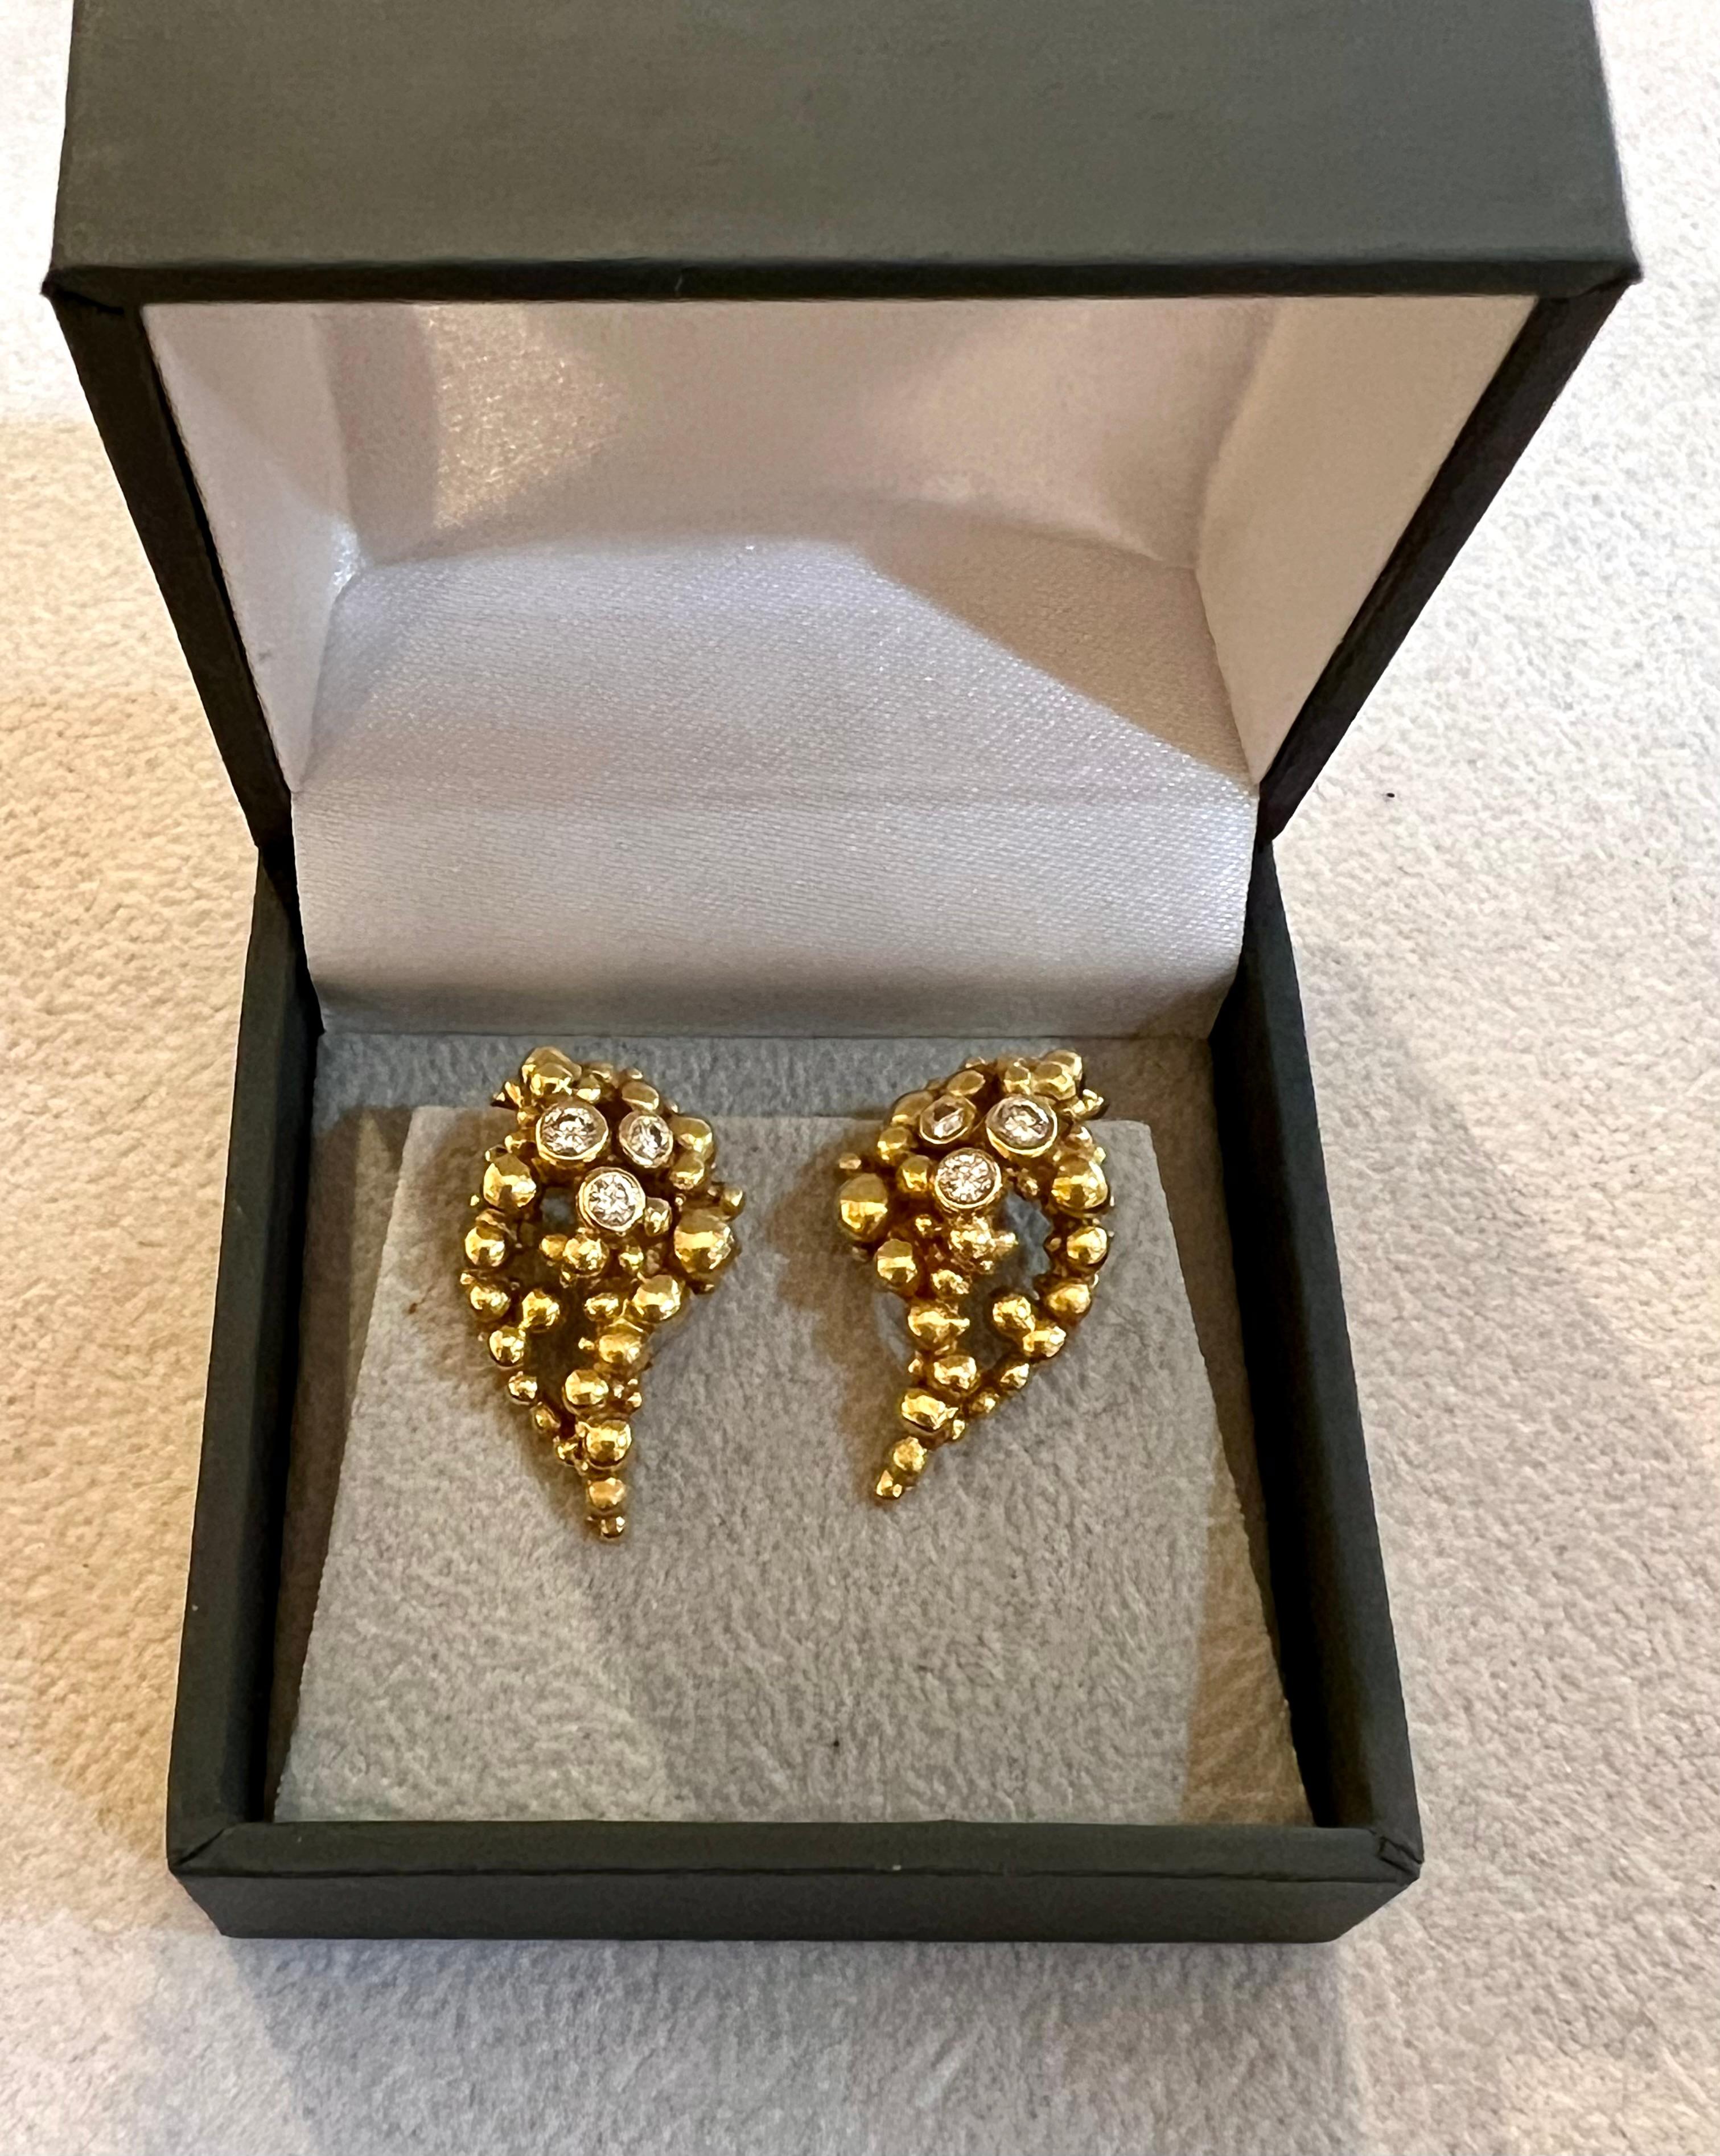 Pair of Gilbert Albert ear clips in yellow gold featuring stylized grape clusters set with brilliant-cut diamonds.

Unique pieces, signed and numbered.

Total estimated weight of diamonds : 0.32 carats

Dimensions : 22.33 x 12.98 x 5 mm (0.879 x